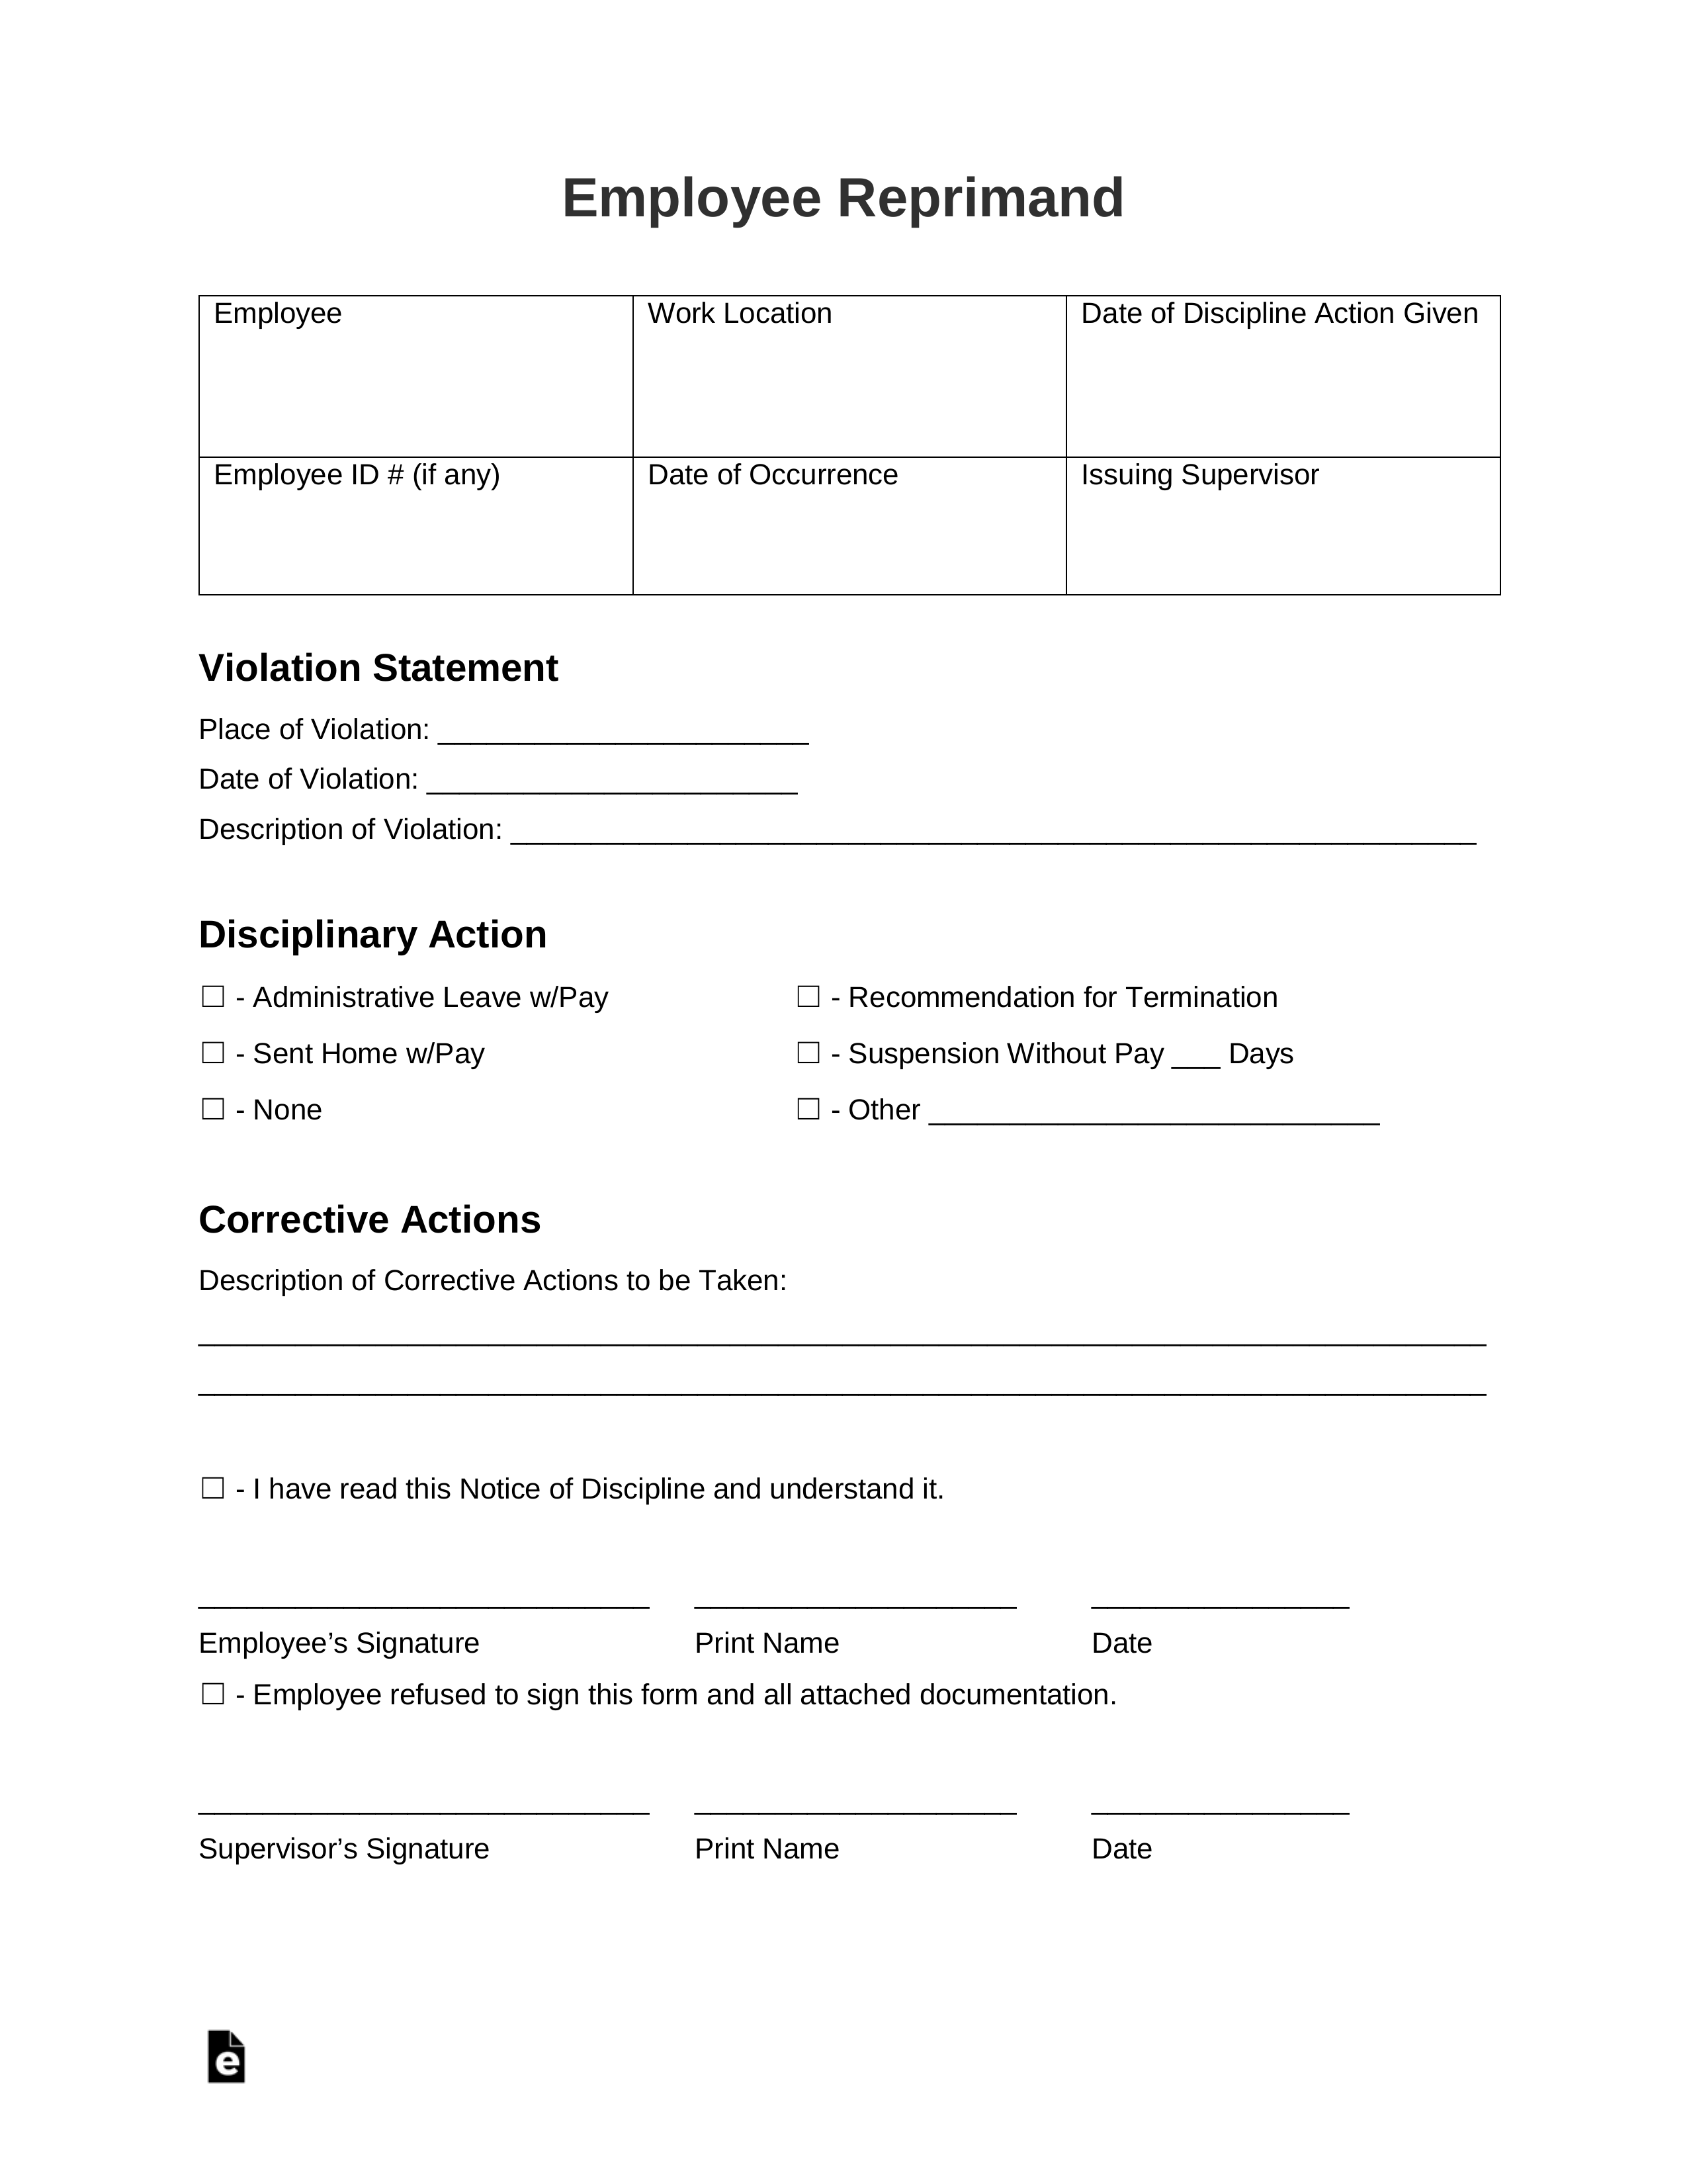 free-employee-reprimand-form-pdf-word-eforms